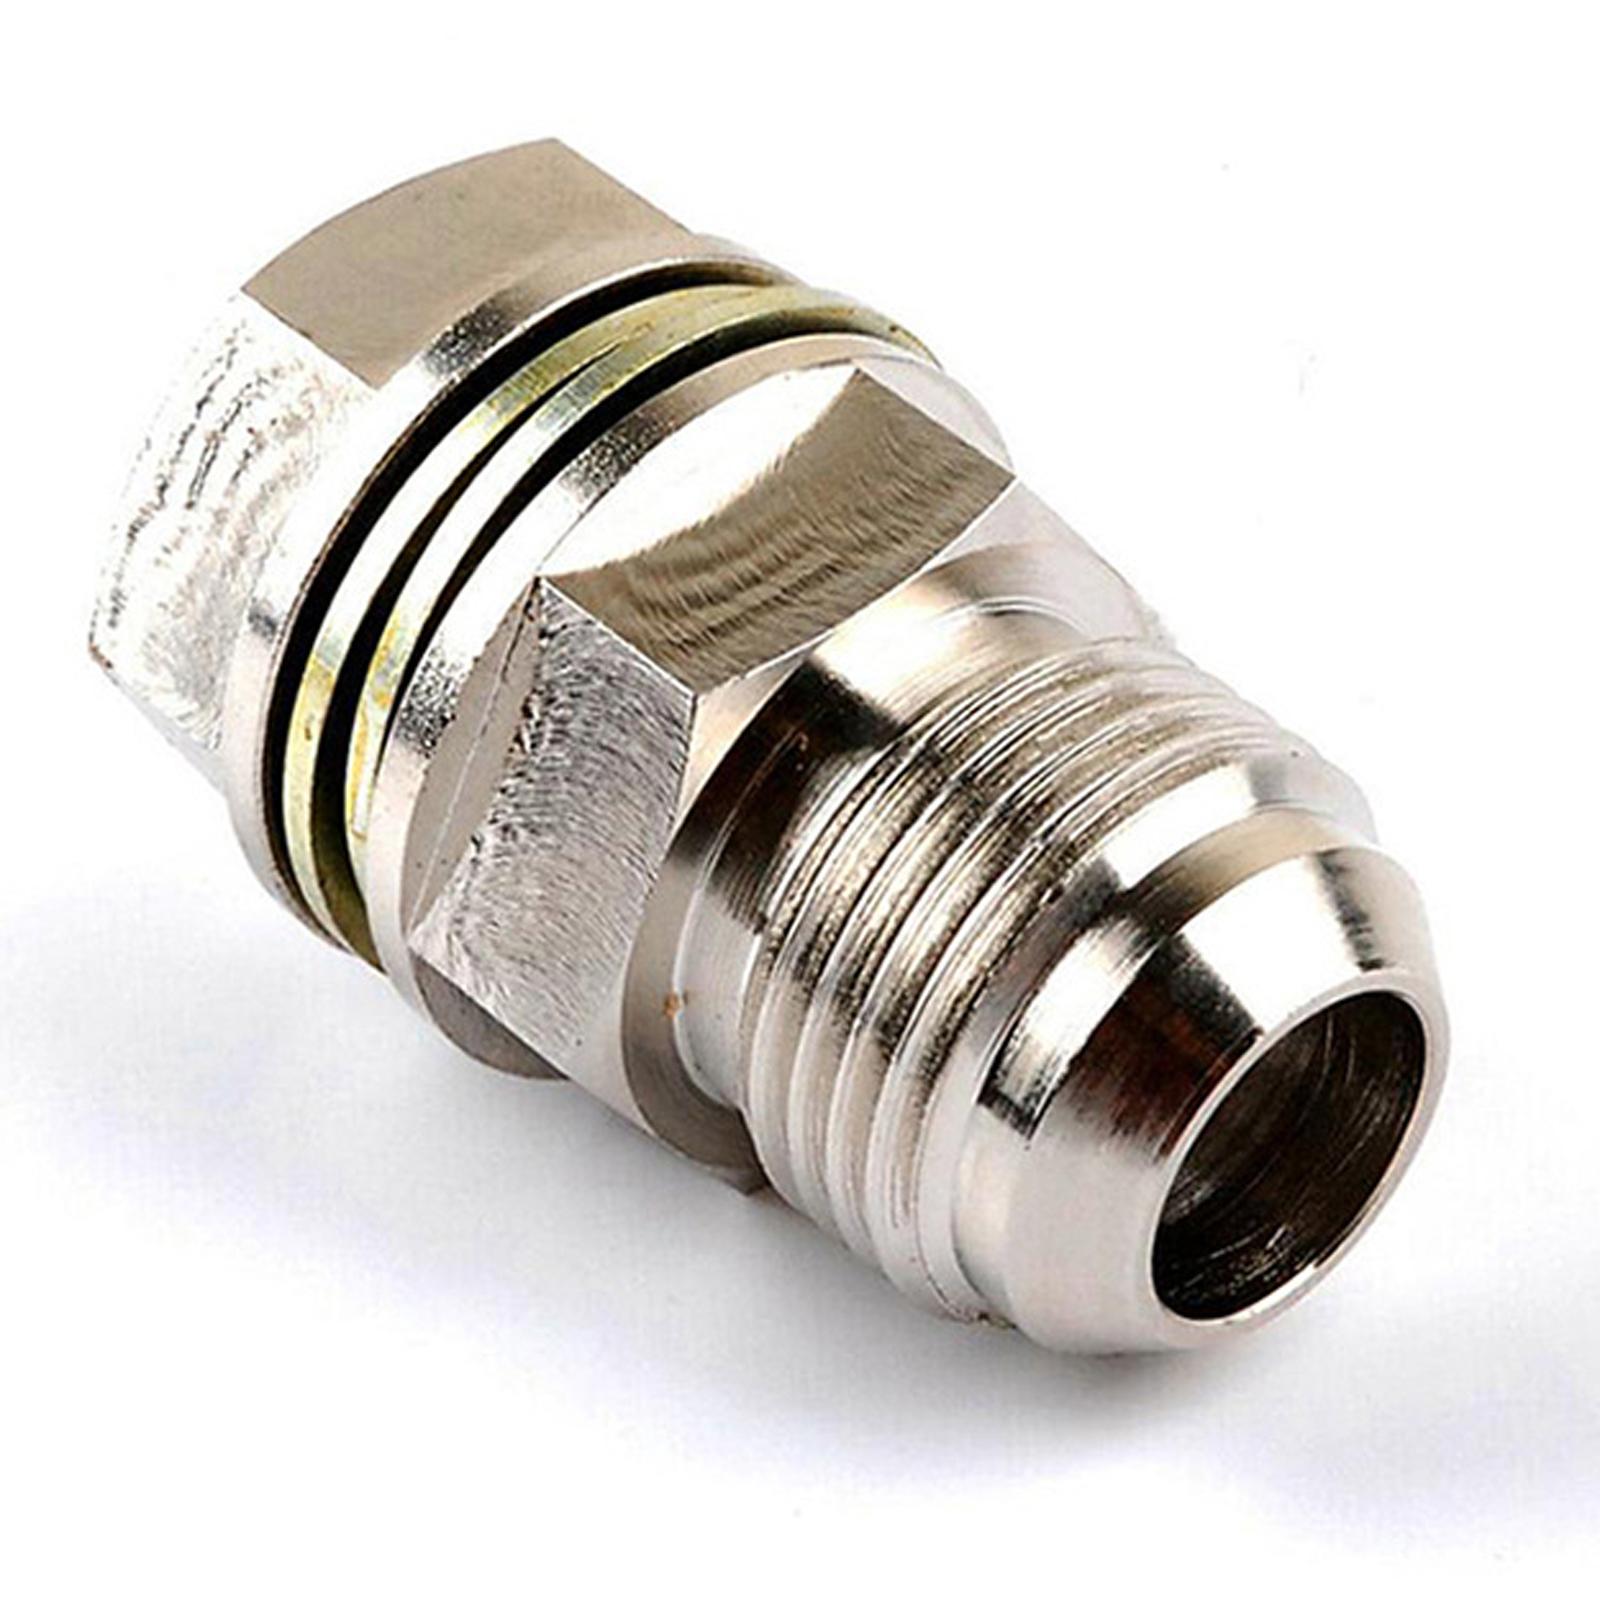 Oil Return Drain Plug Adapter Durable No Welding Replacement Car Acecssories